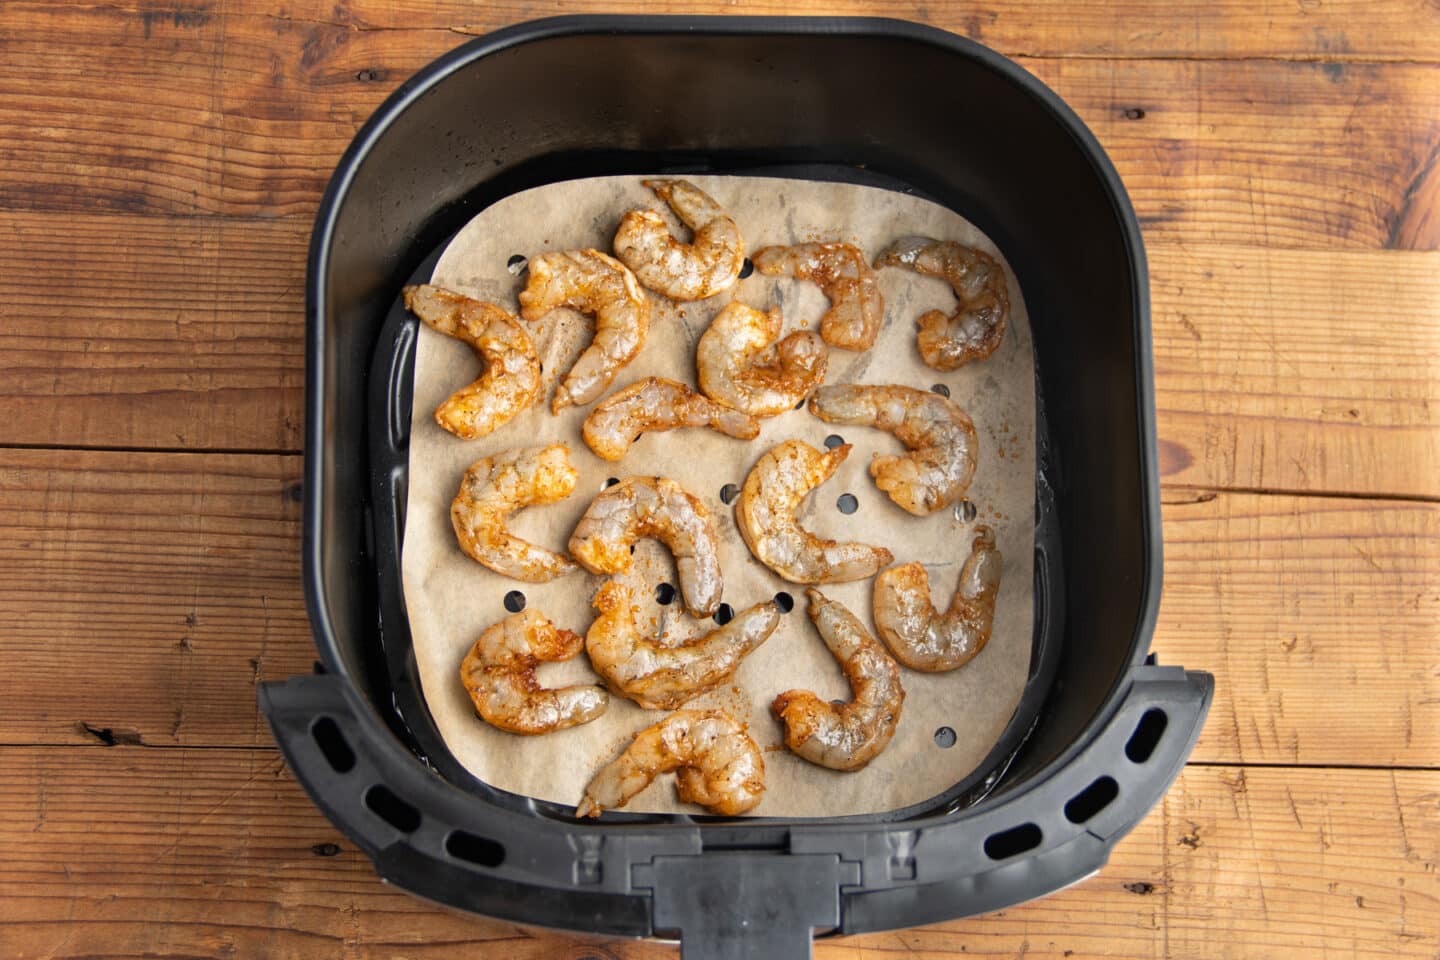 Picture of shrimp in air fryer.